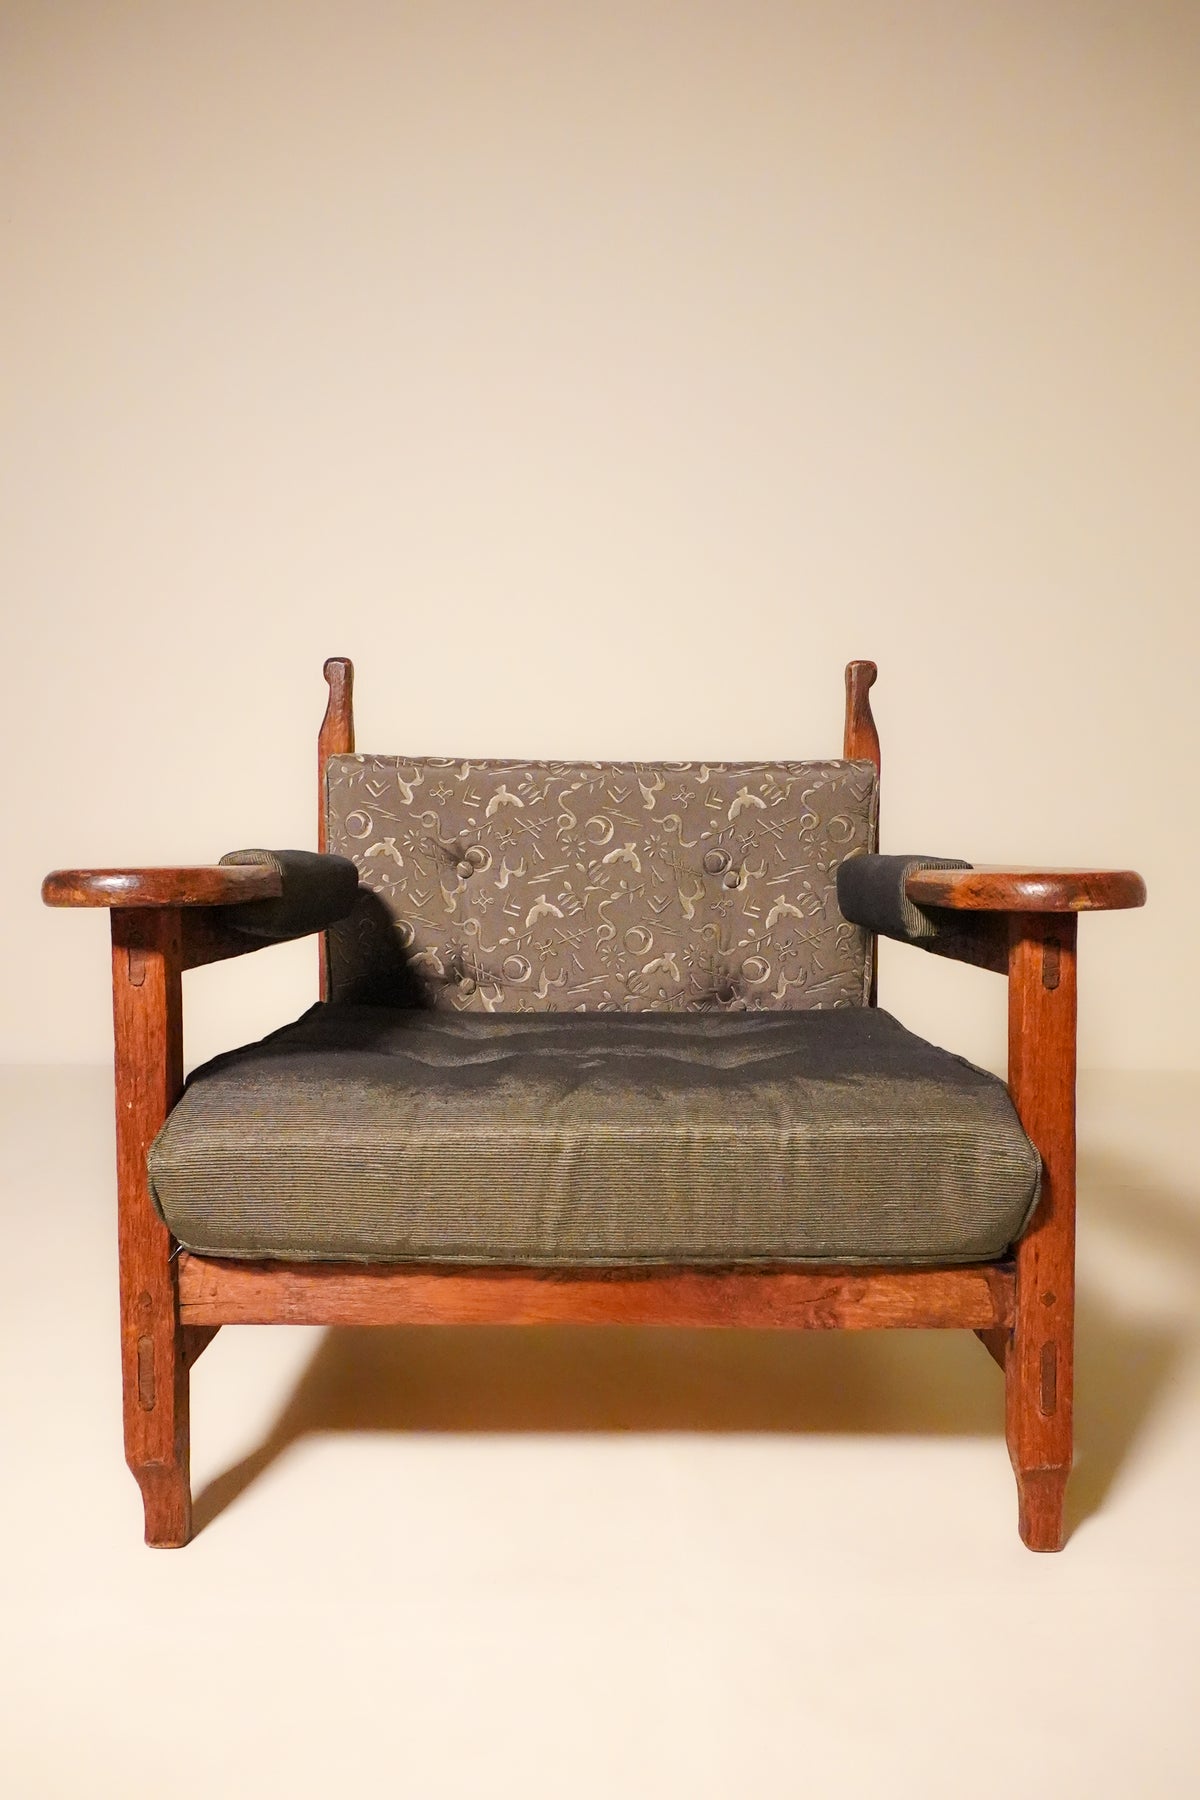 Brutalist Lounge Chair in Folklore and Athena